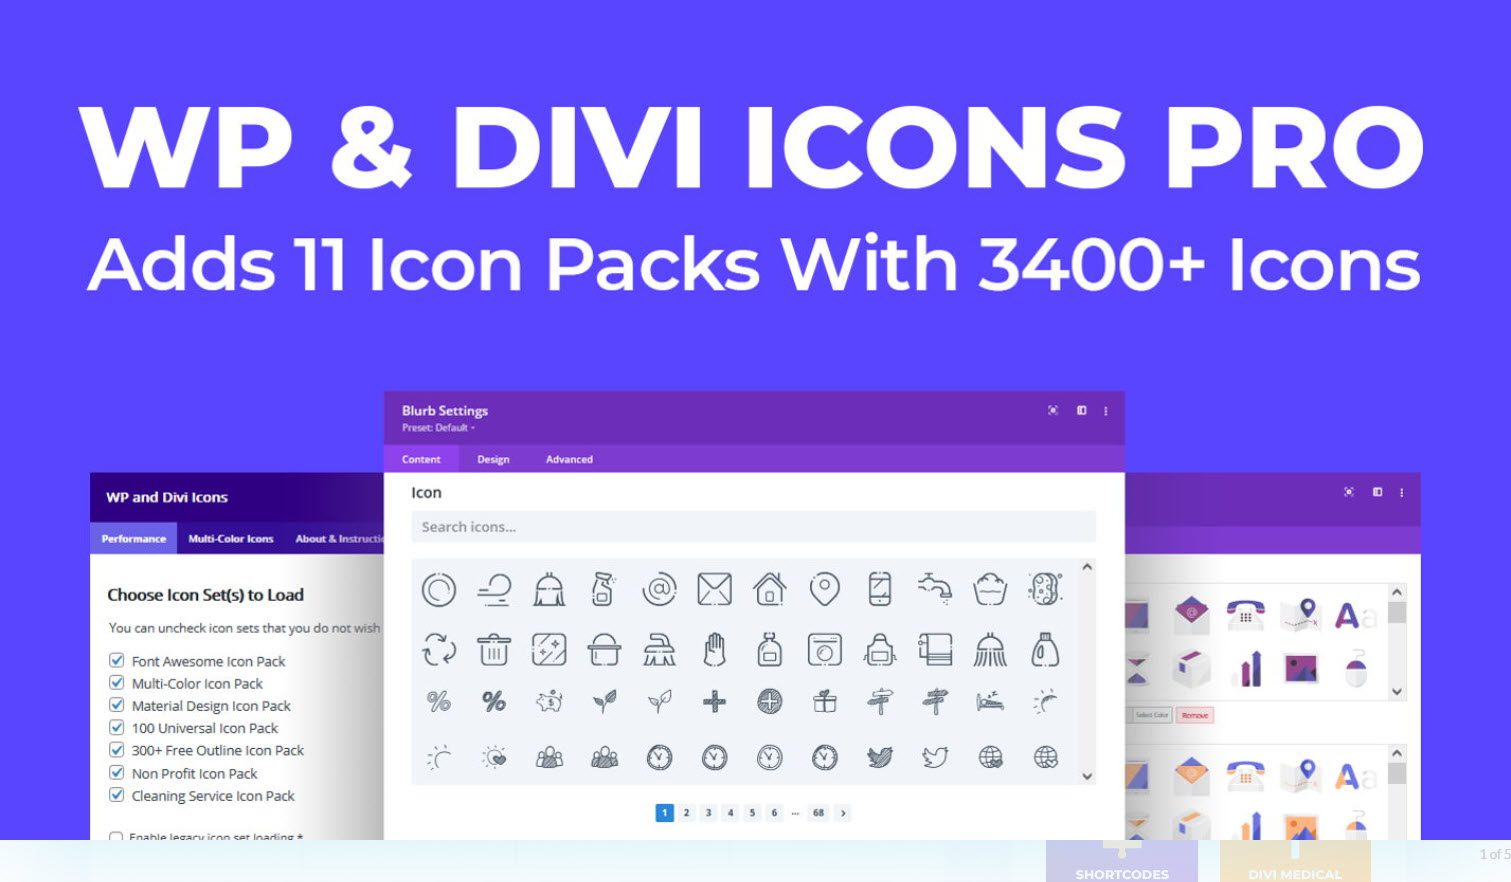 Where to Purchase WP and Divi Icons Pro